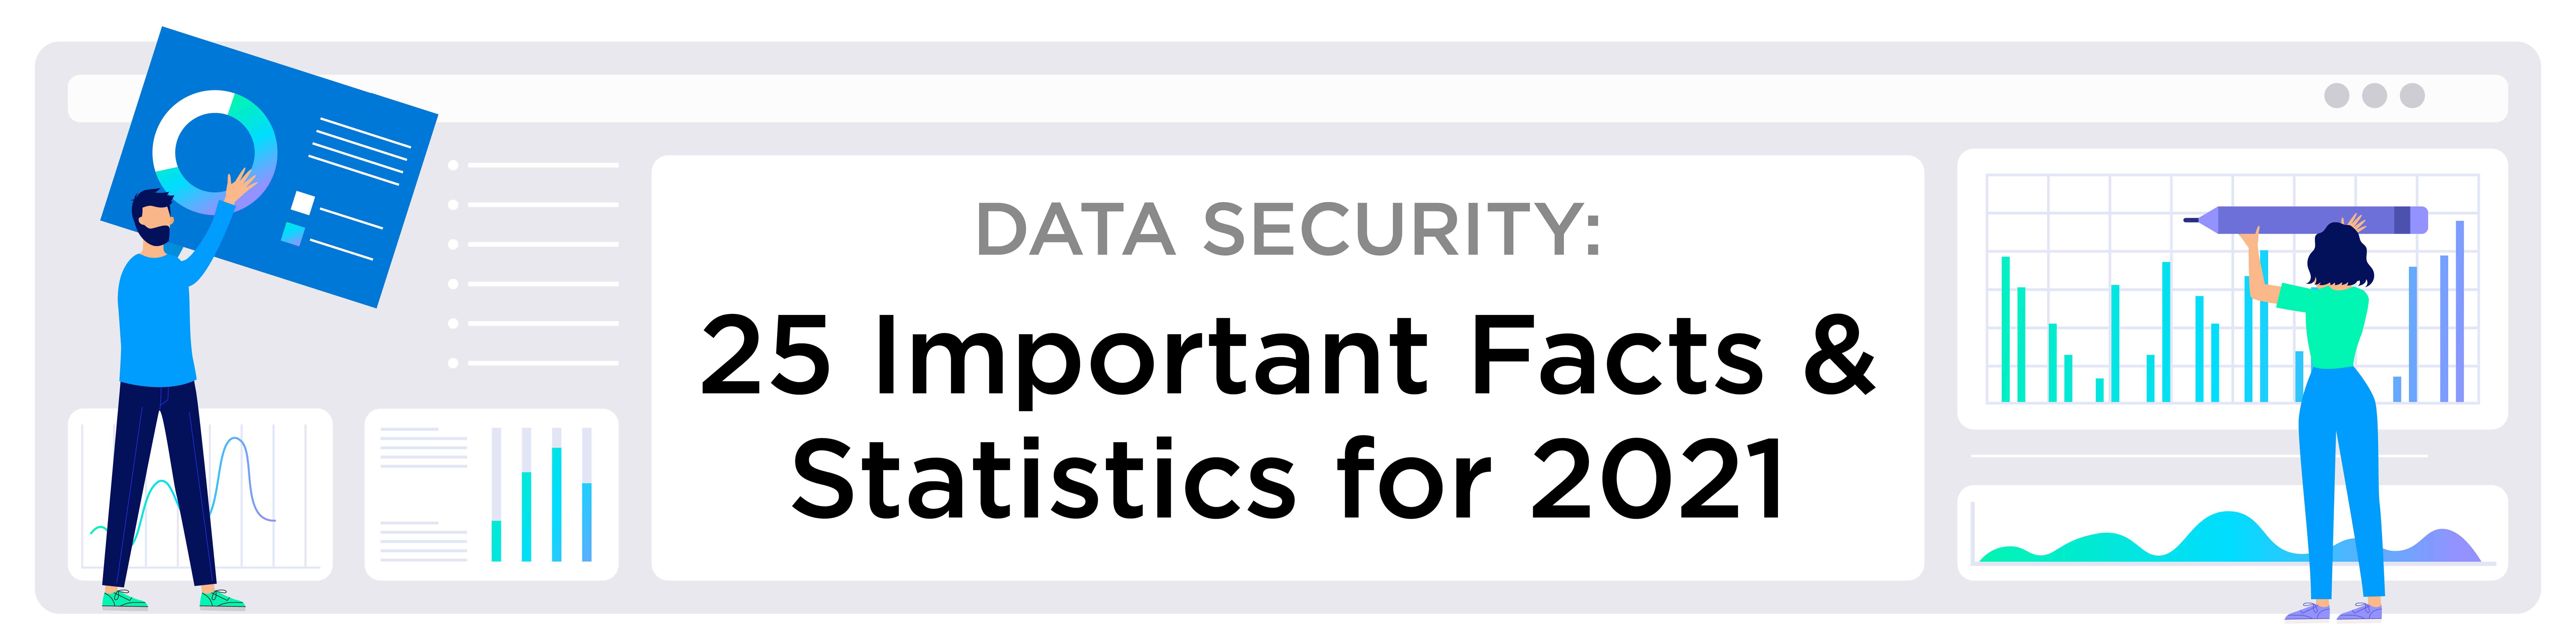 Data Security: 25 Important Facts and Statistics for 2020